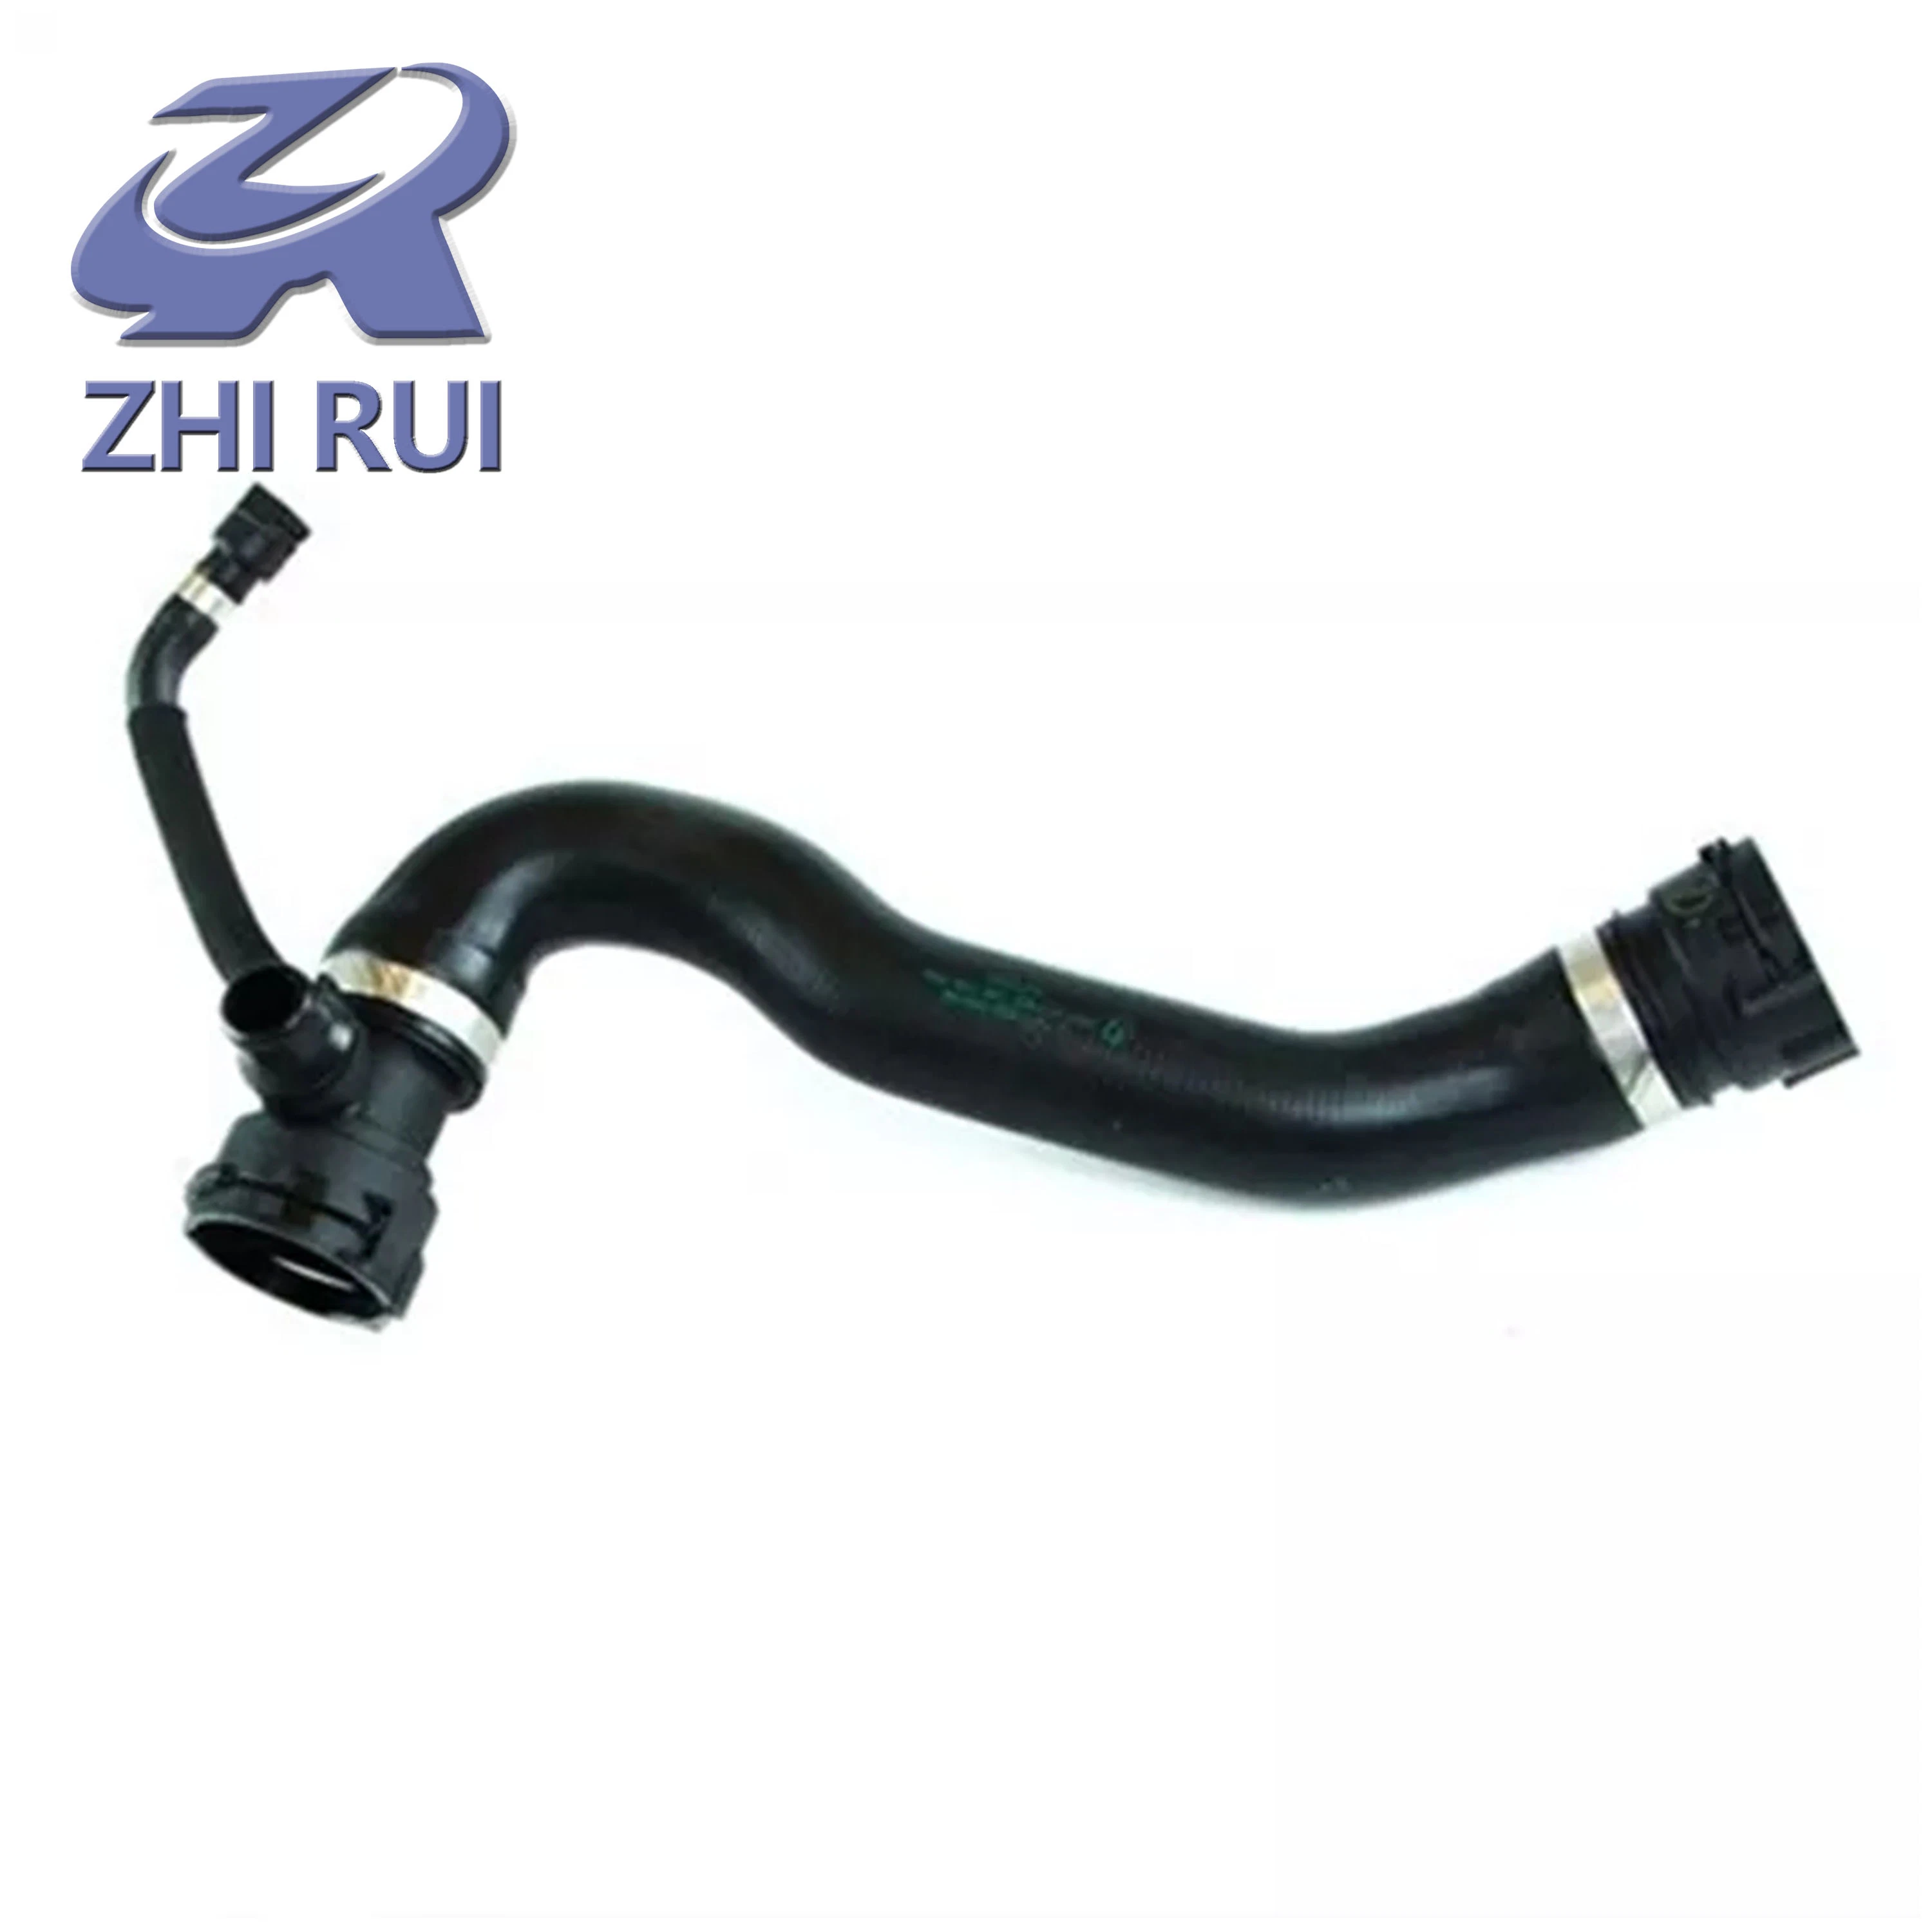 1712 7800 099 Auto Engine Parts Automobile Engine Structure Cooling System Water Pipe for BMW F10 F07 F11 F01 F02 F03 F04 OEM 17127800099